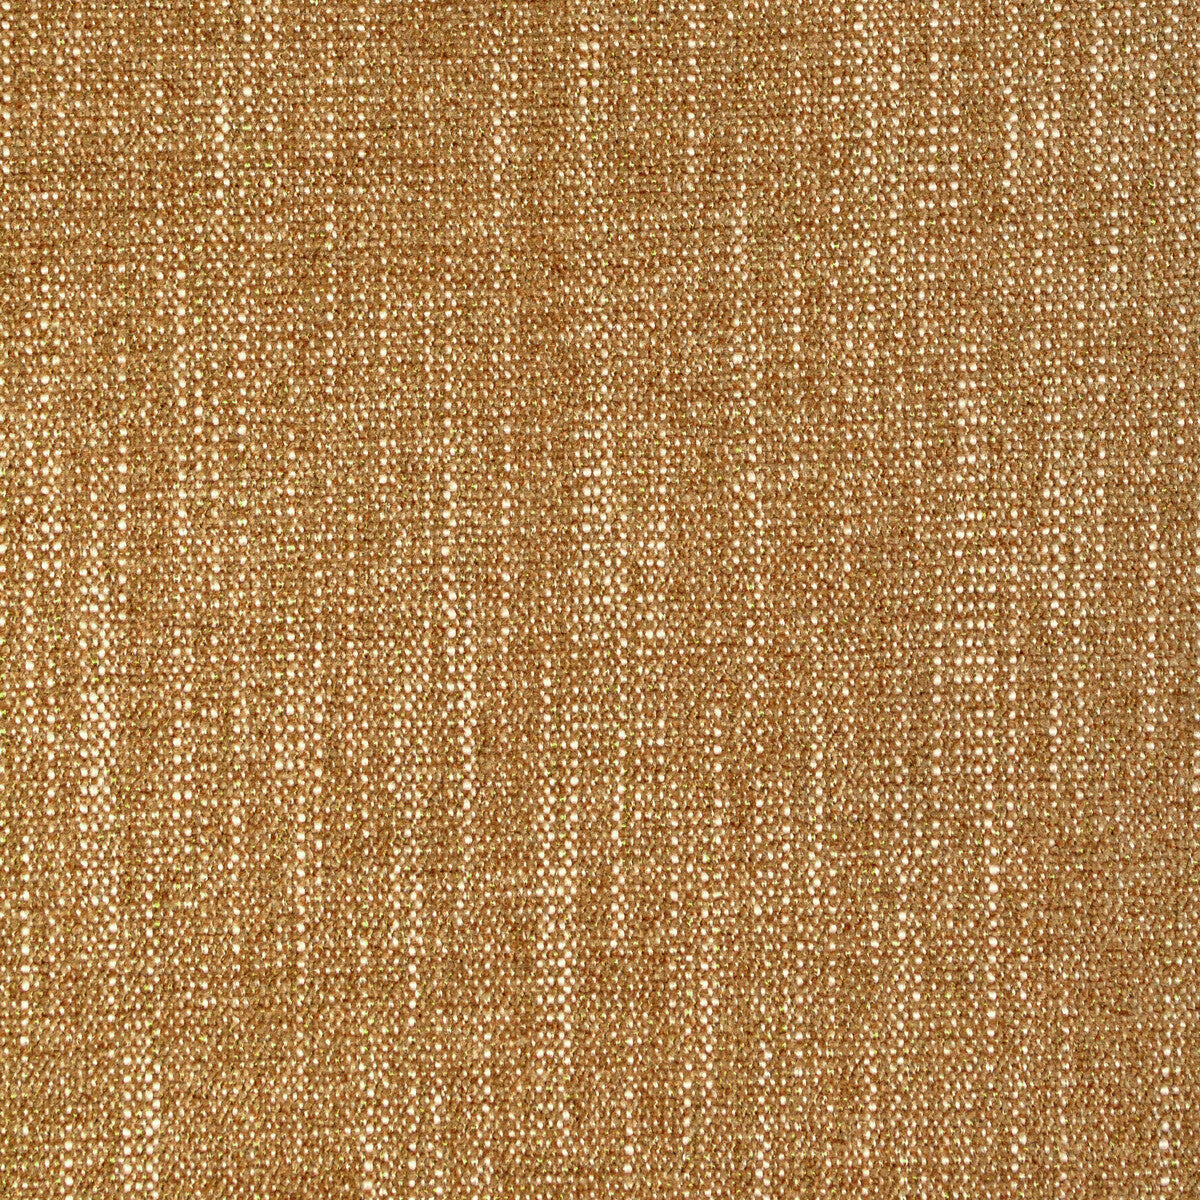 Marnie fabric in toffee color - pattern 36747.64.0 - by Kravet Contract